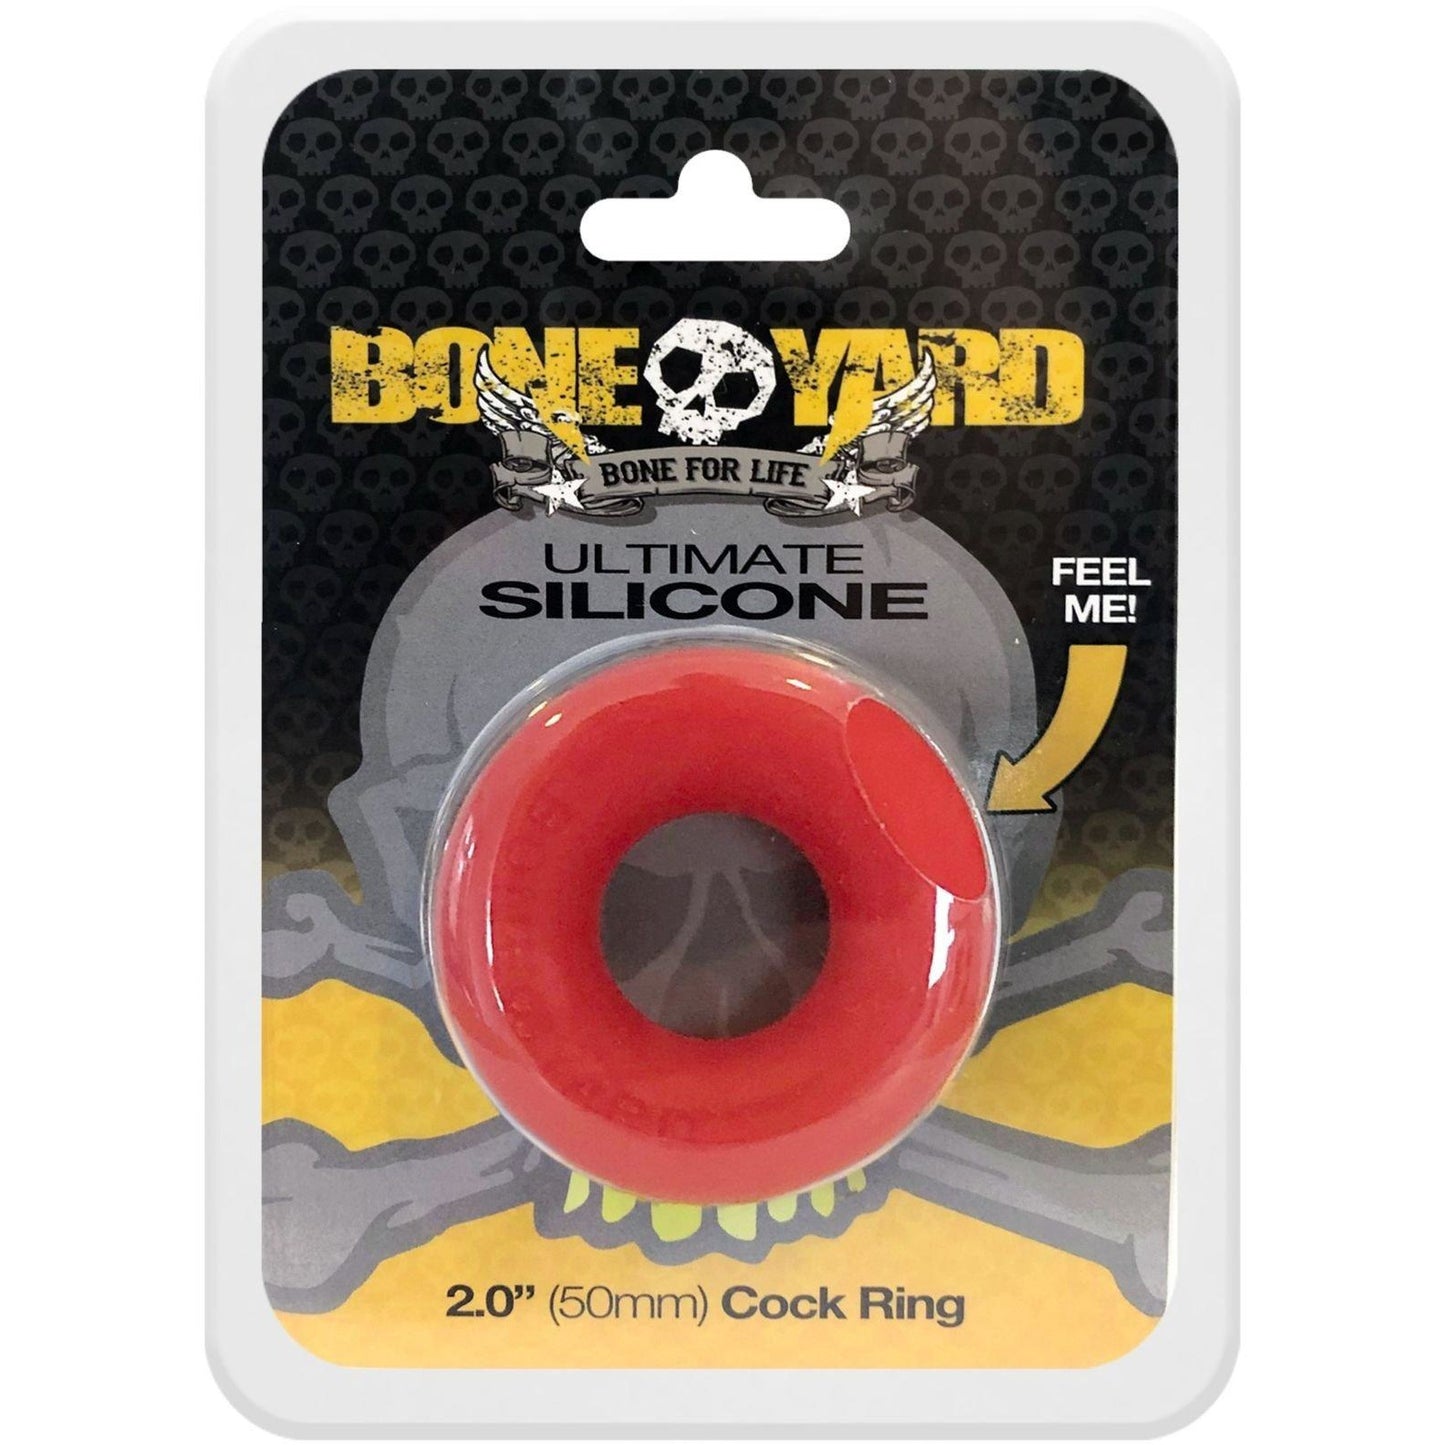 Ultimate Silicone Cock Ring Red - C1RB2B